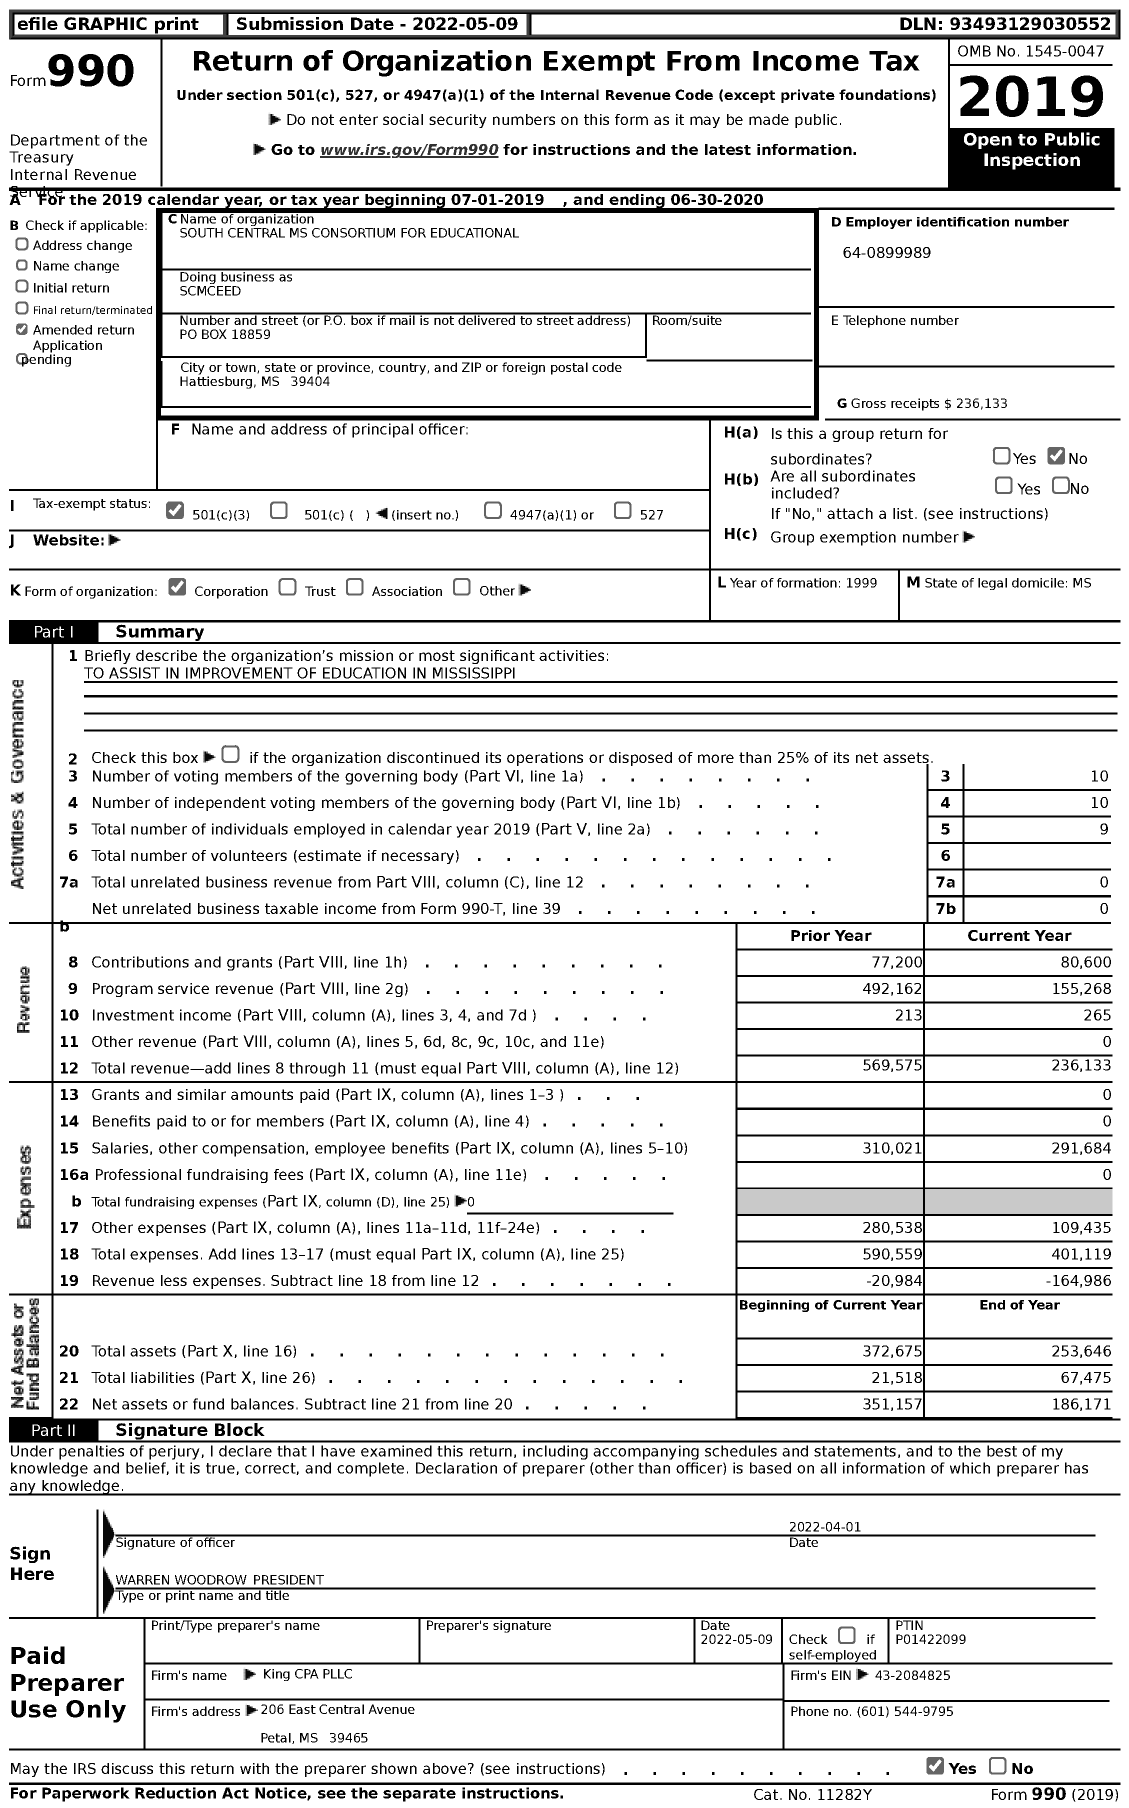 Image of first page of 2019 Form 990 for South Central Mississippi Cons for Educational Excellence and DVLPMT (SCMCEED)